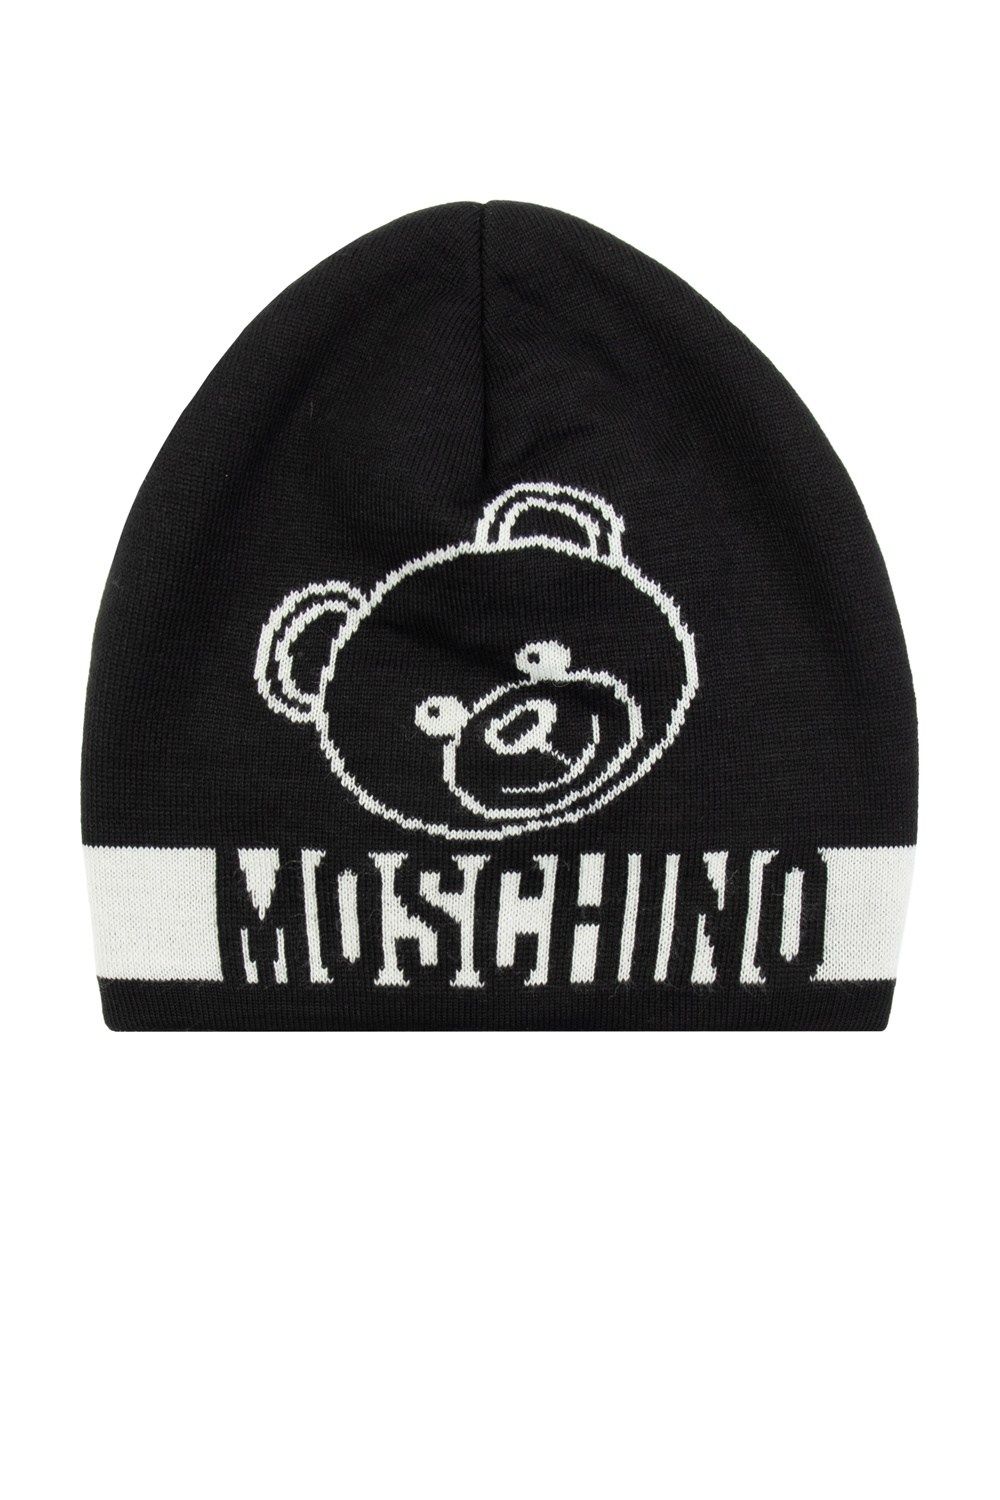 Moschino hat with logo